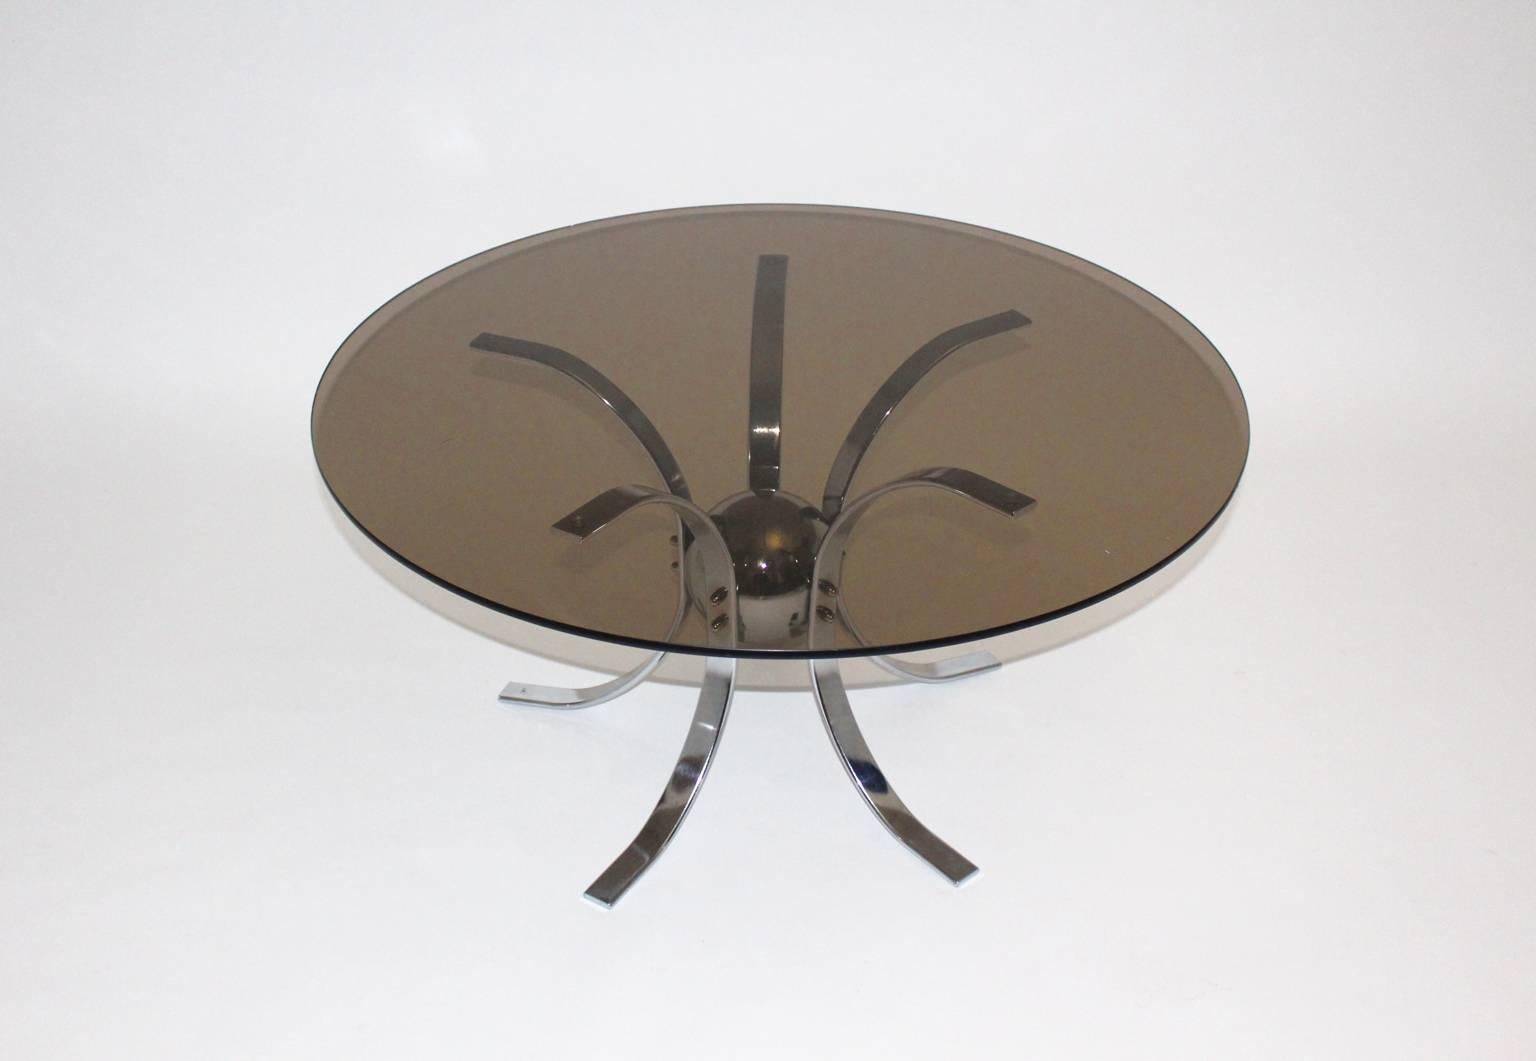 Space Age Vintage Chromed Metal Glass Vintage Sputnik Coffee Table 1960 In Good Condition For Sale In Vienna, AT